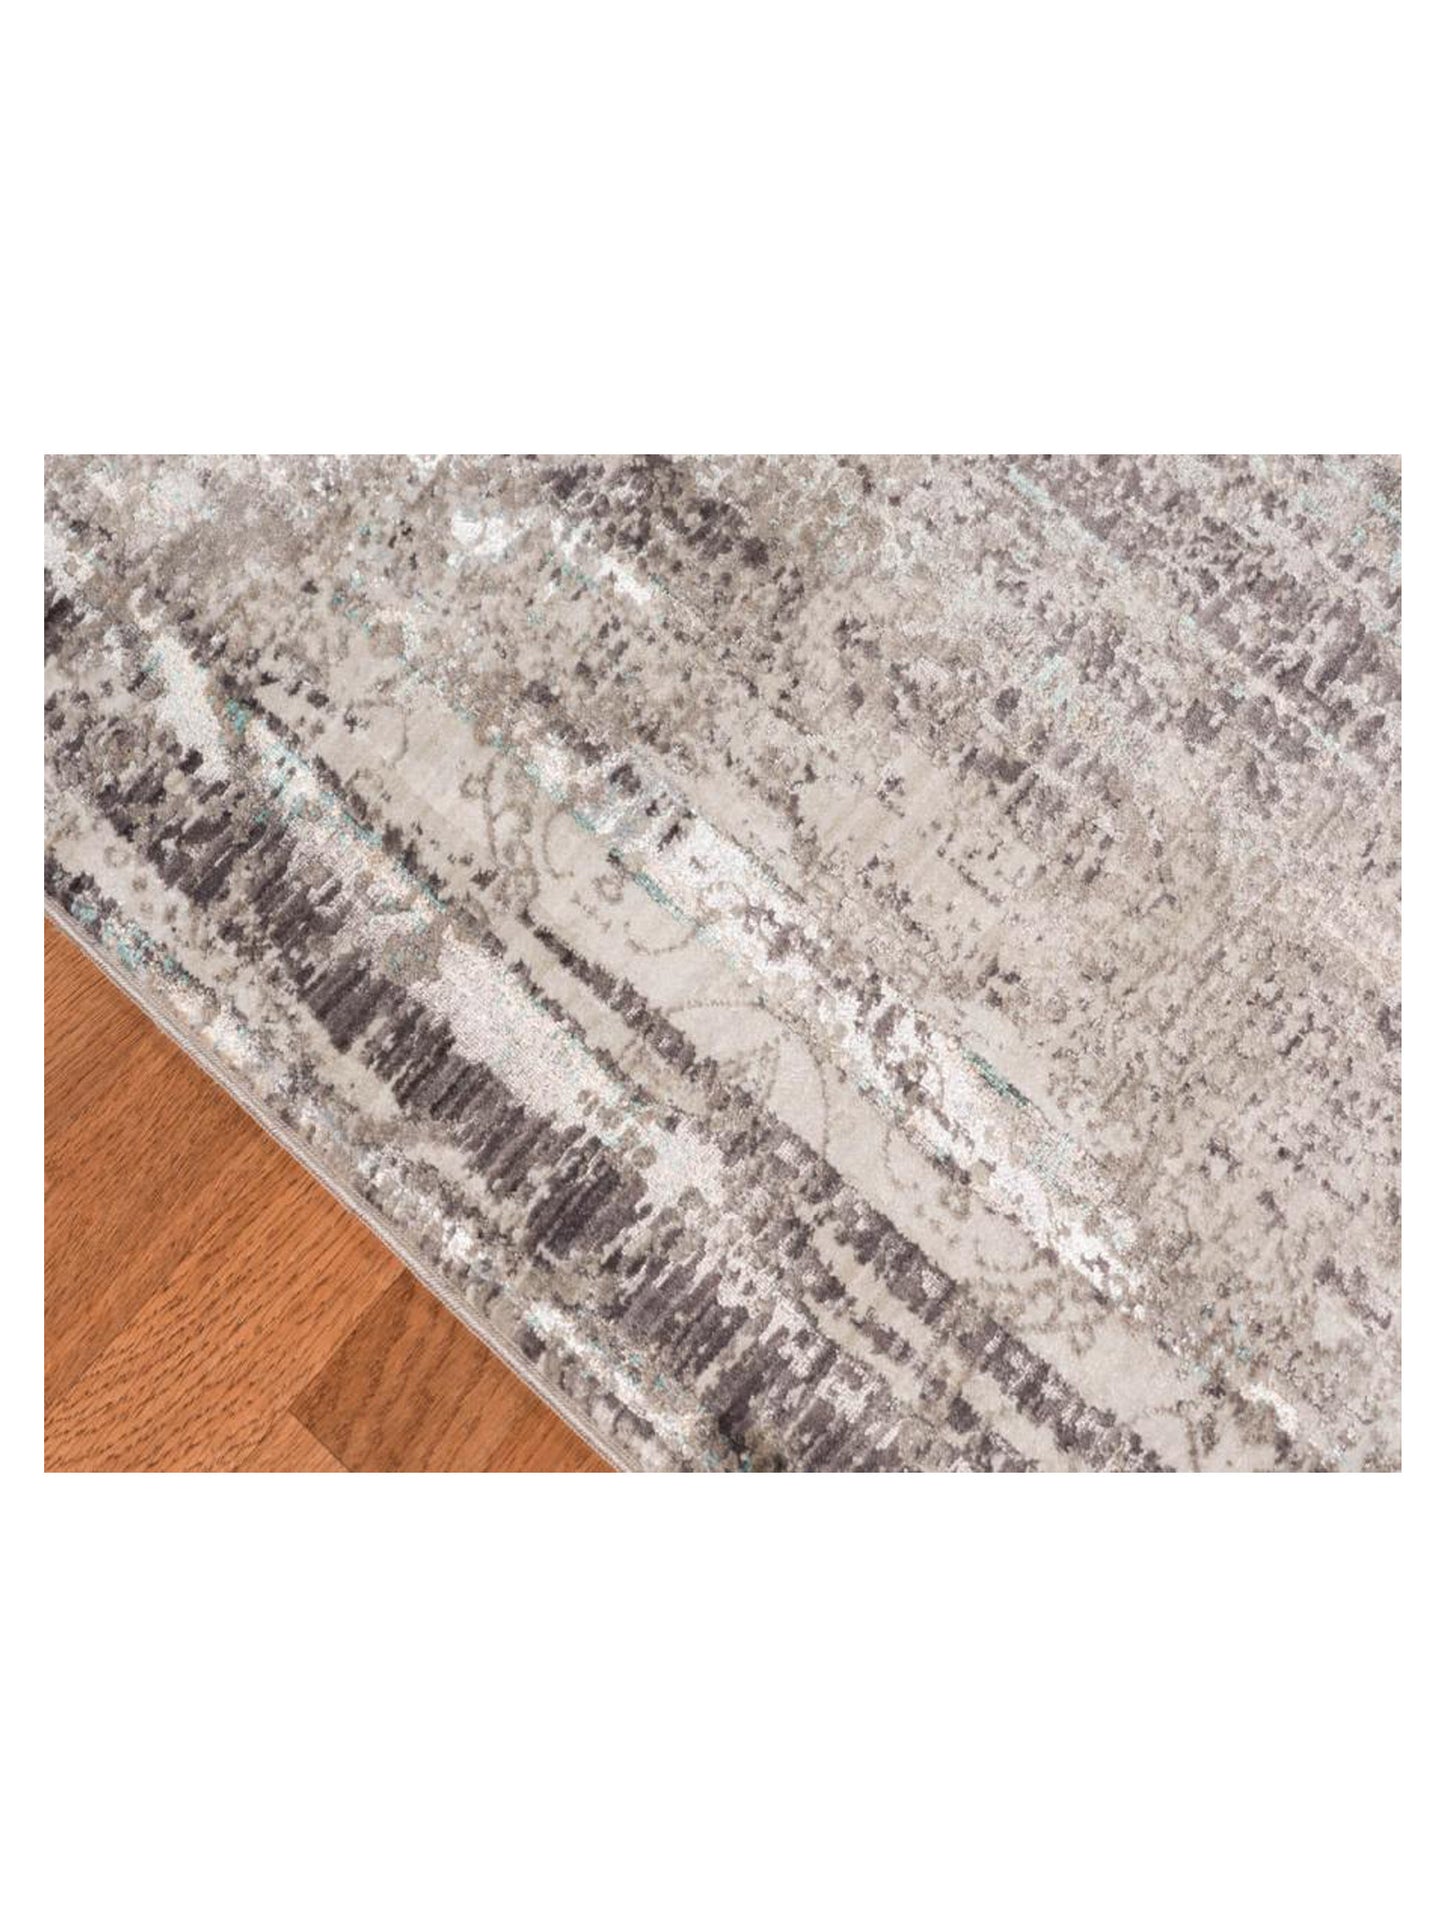 Limited Rosy RO-503 DOVE GRAY Transitional Machinemade Rug